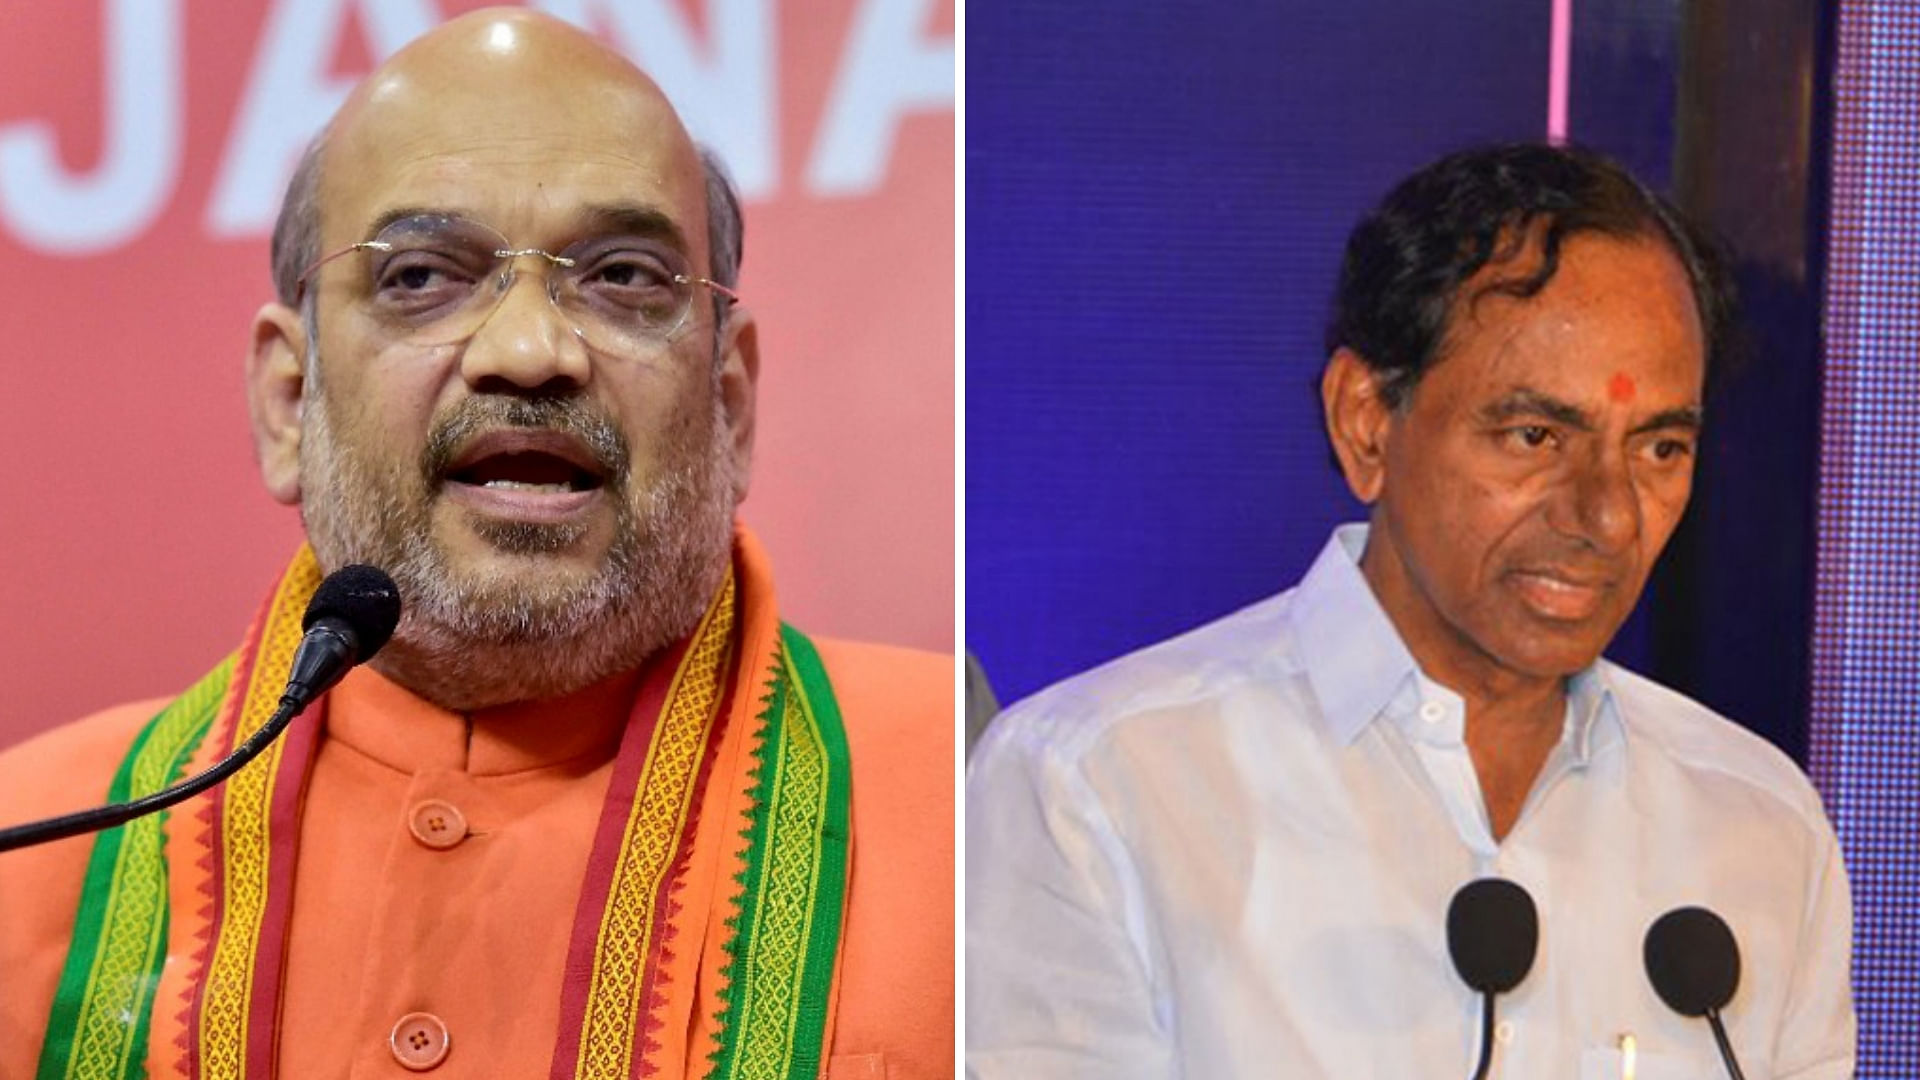 The BJP chief attacked KCR on his stance on simultaneous elections and slammed the Congress on its coalition plans.